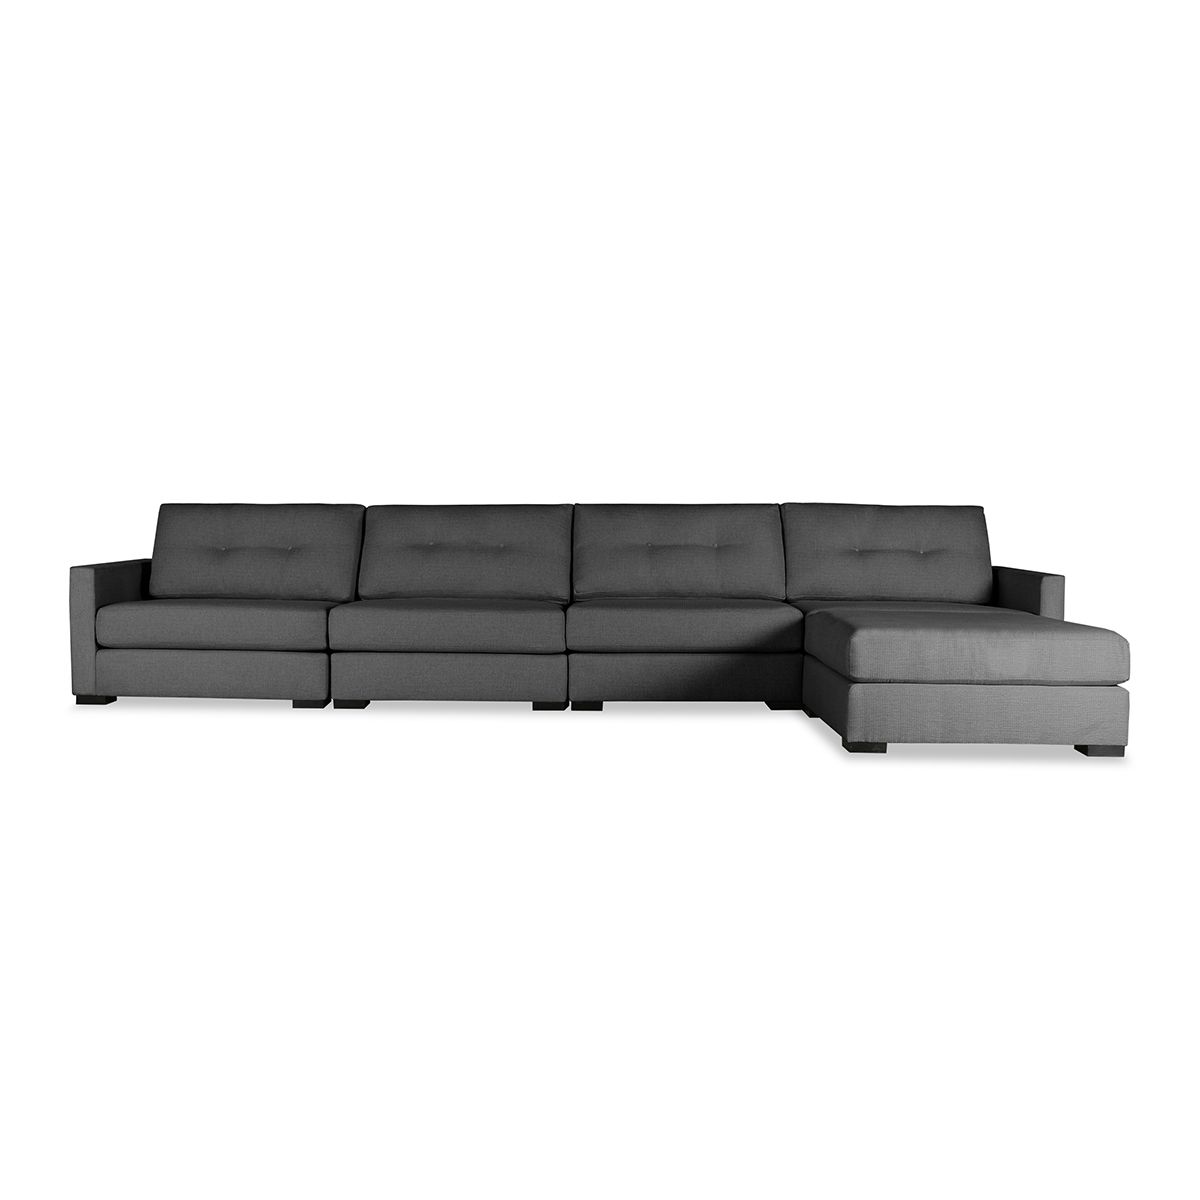 Wilton Buttoned Modular Right Chaise Sectional For Wilton Fabric Sectional Sofas (View 6 of 15)